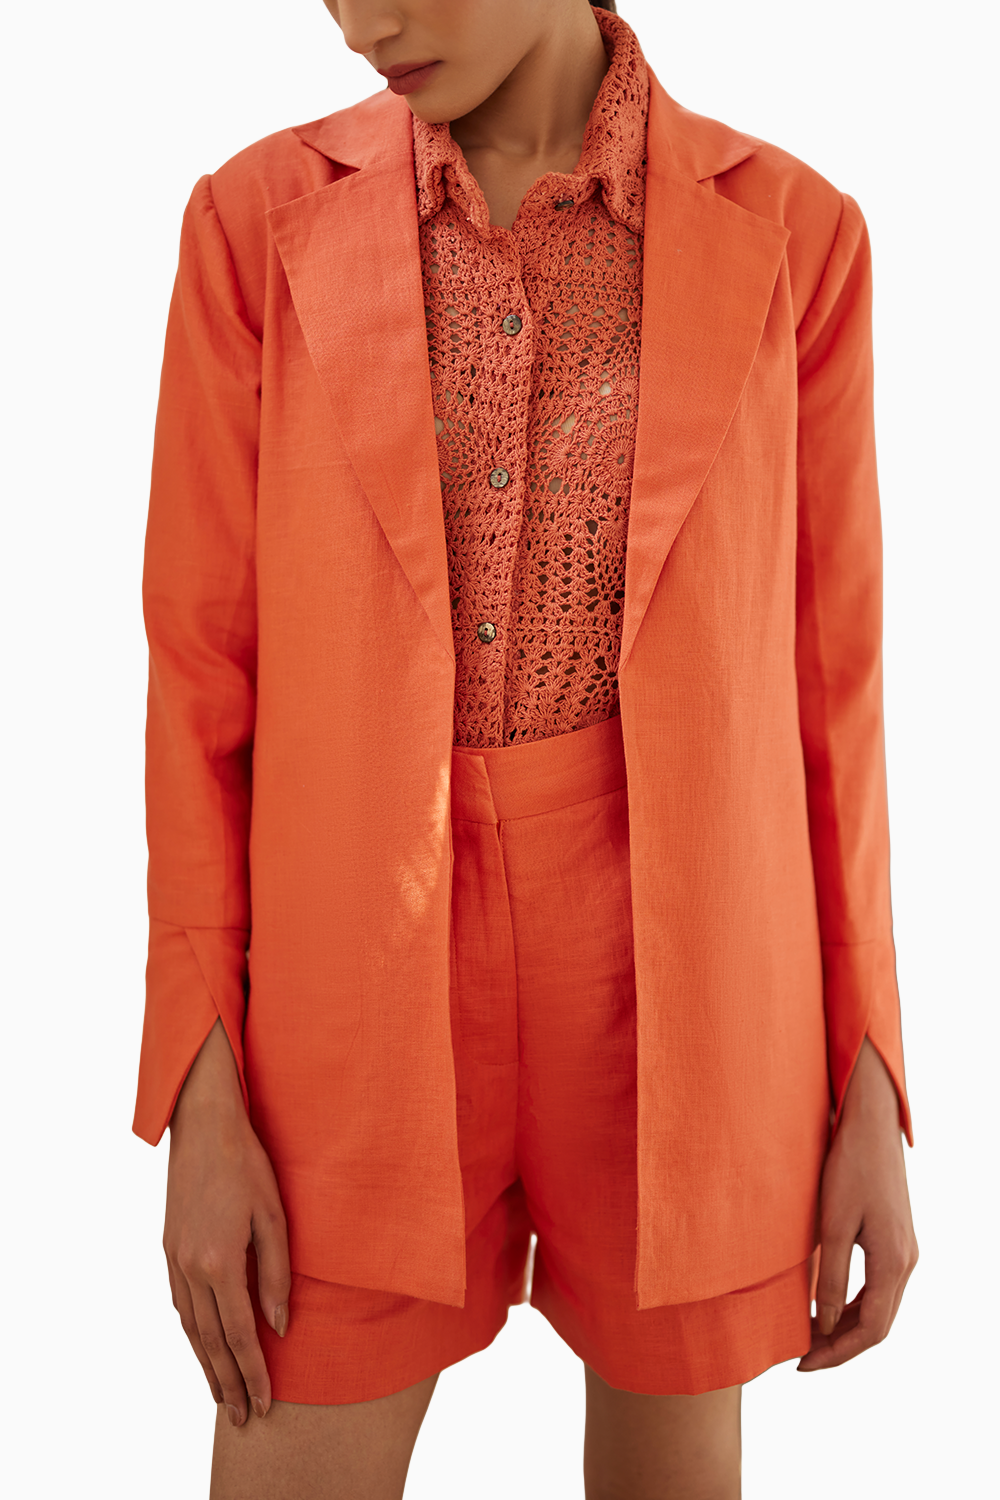 Rust Crochet Shirt with Peony Short and Jacket